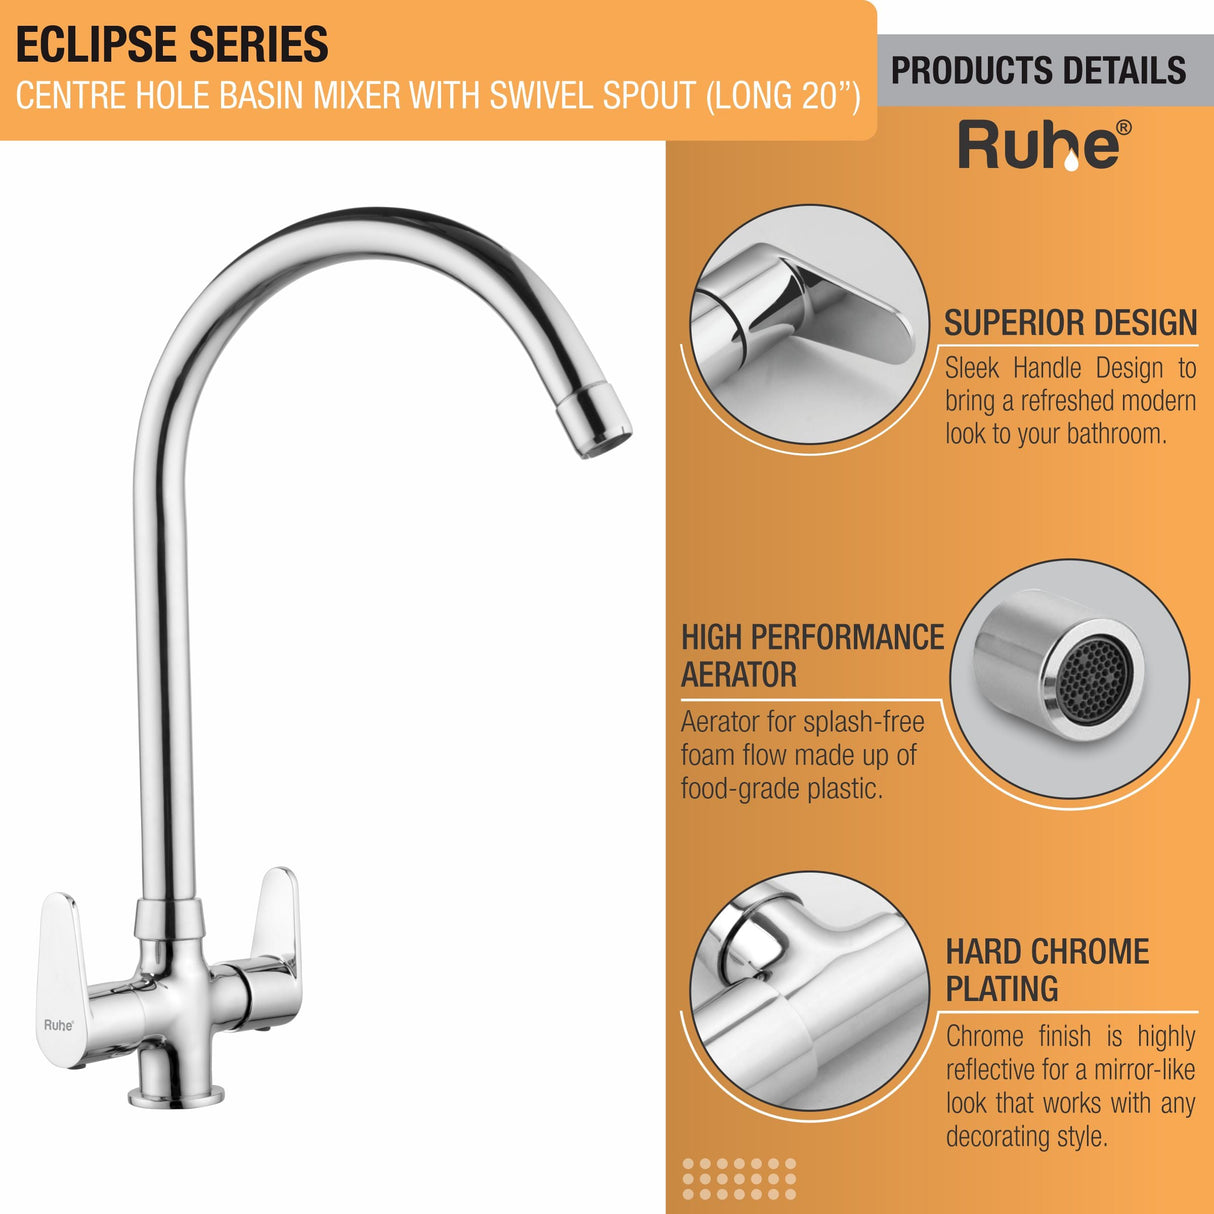 Eclipse Centre Hole Basin Mixer with Large (20 inches) Round Swivel Spout Faucet product details